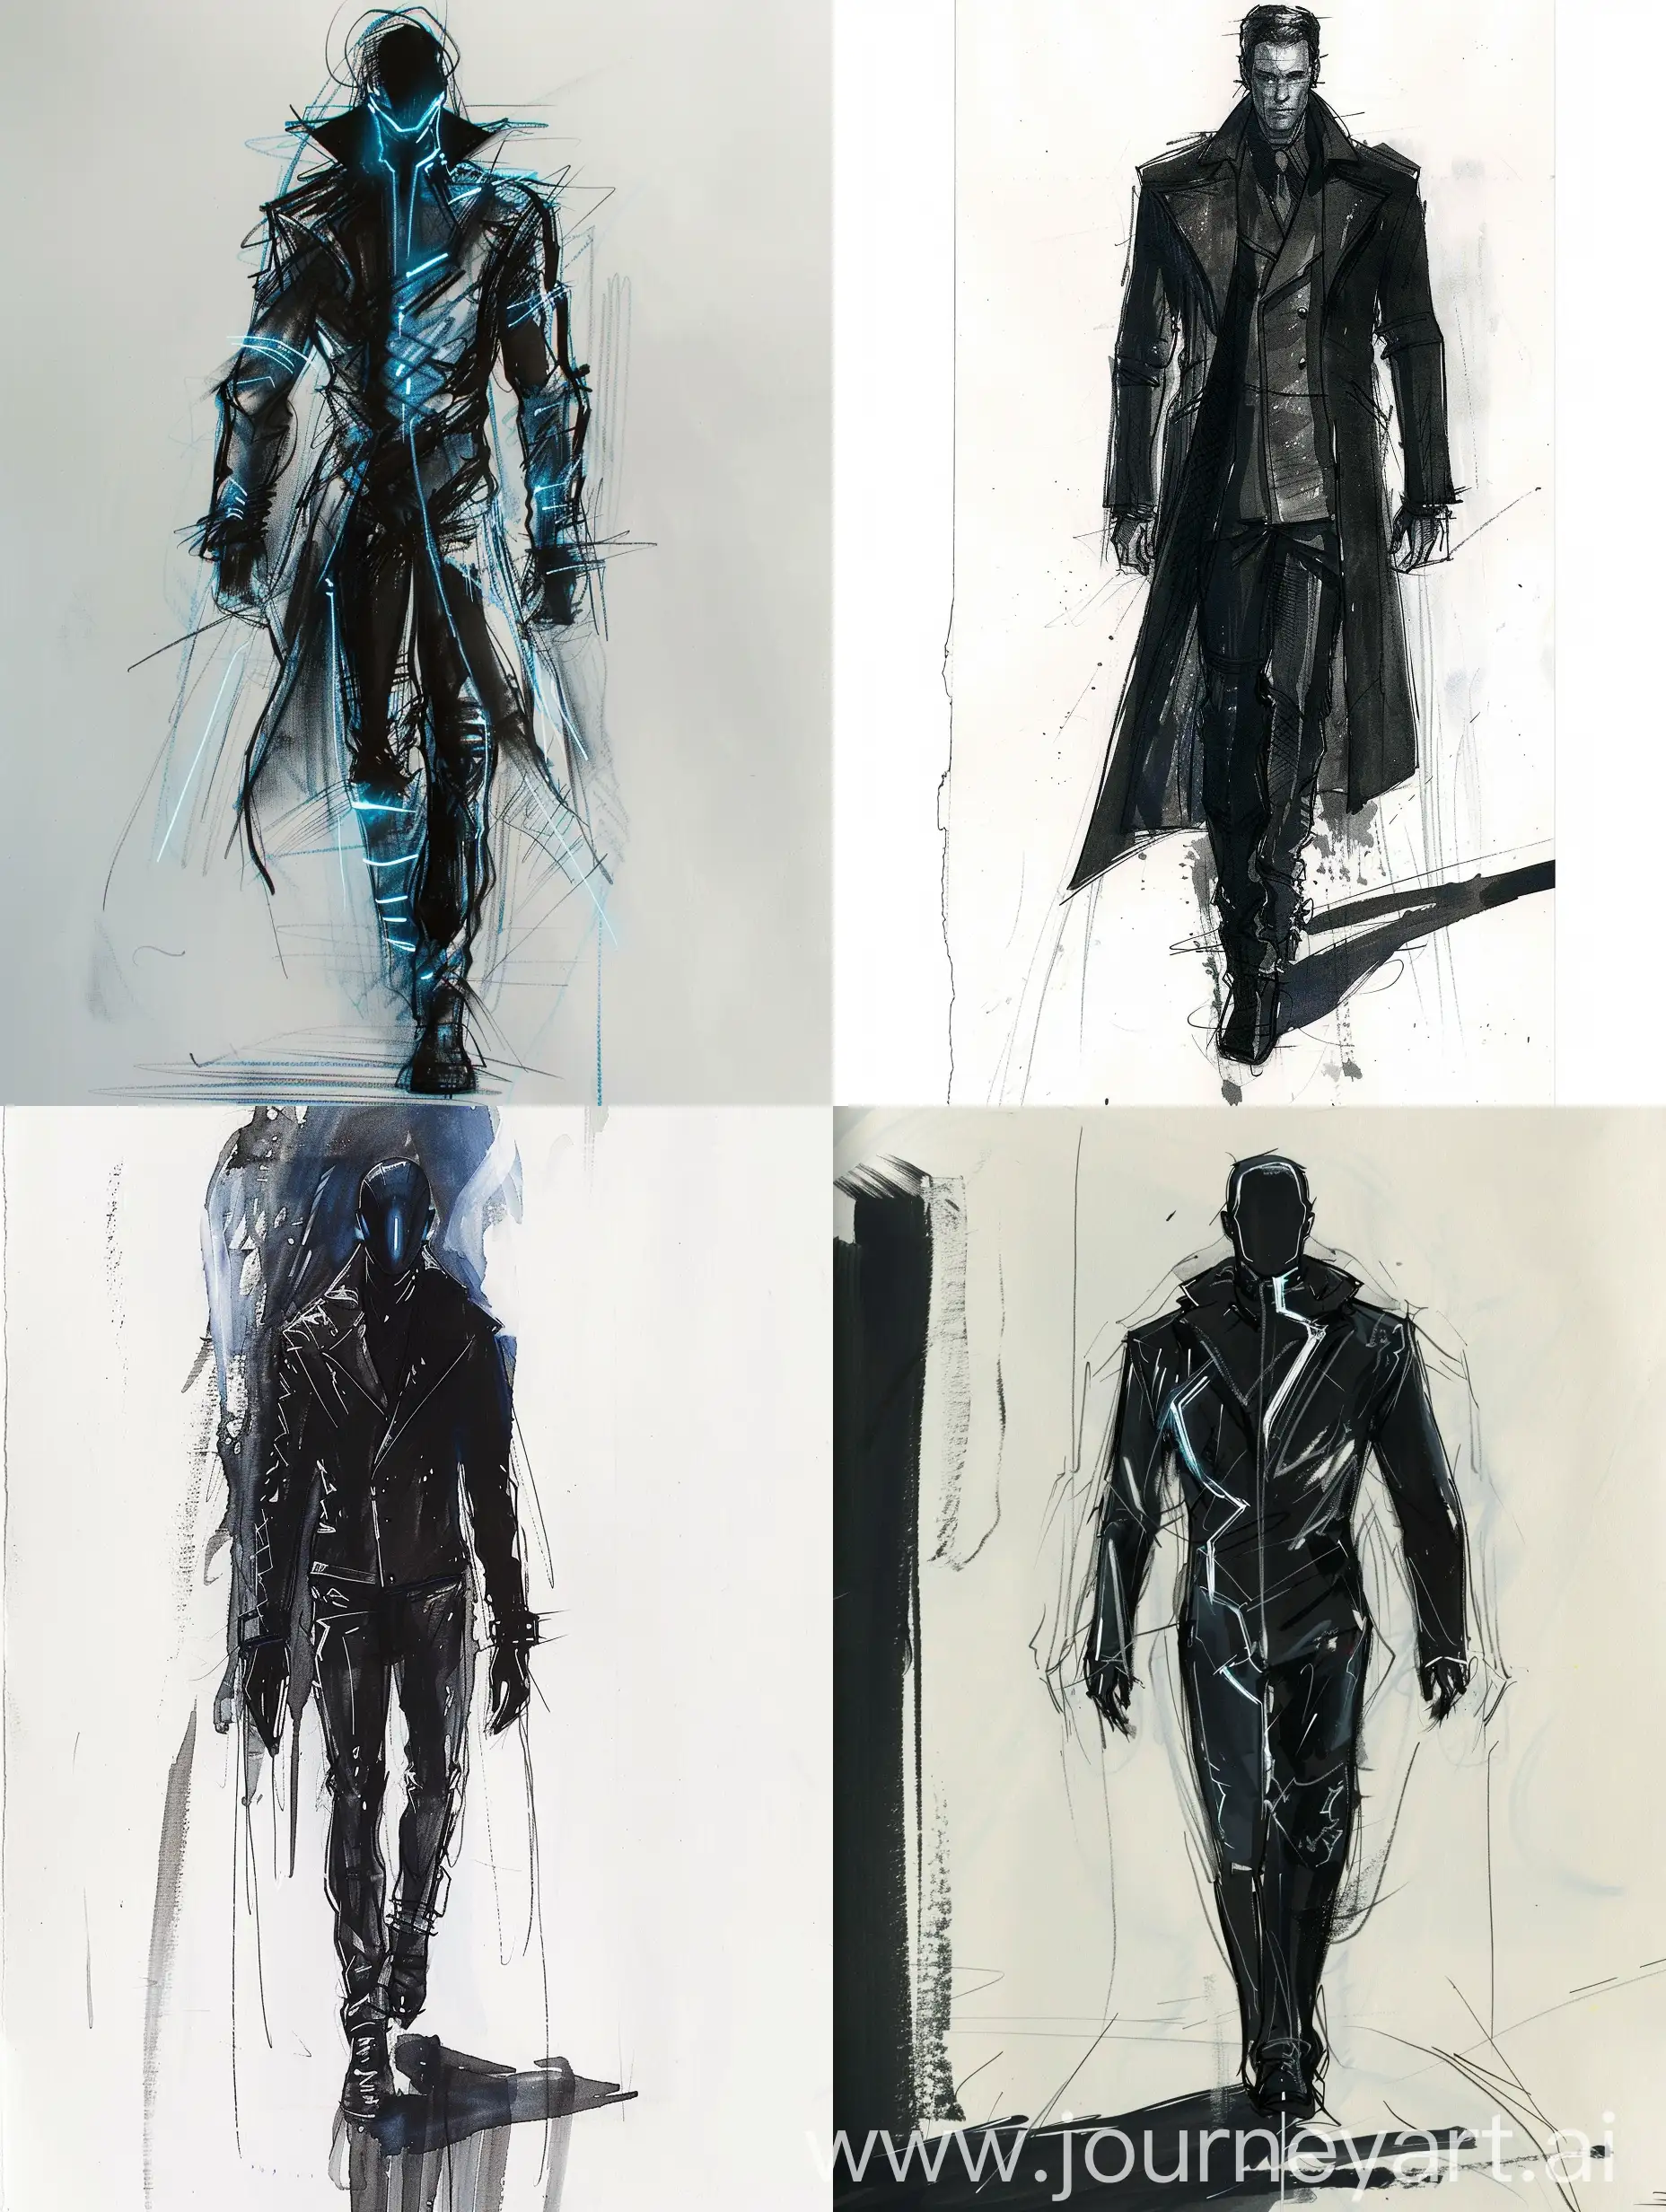 Men Fashion Sketch inspired by the film Tron: Legacy

